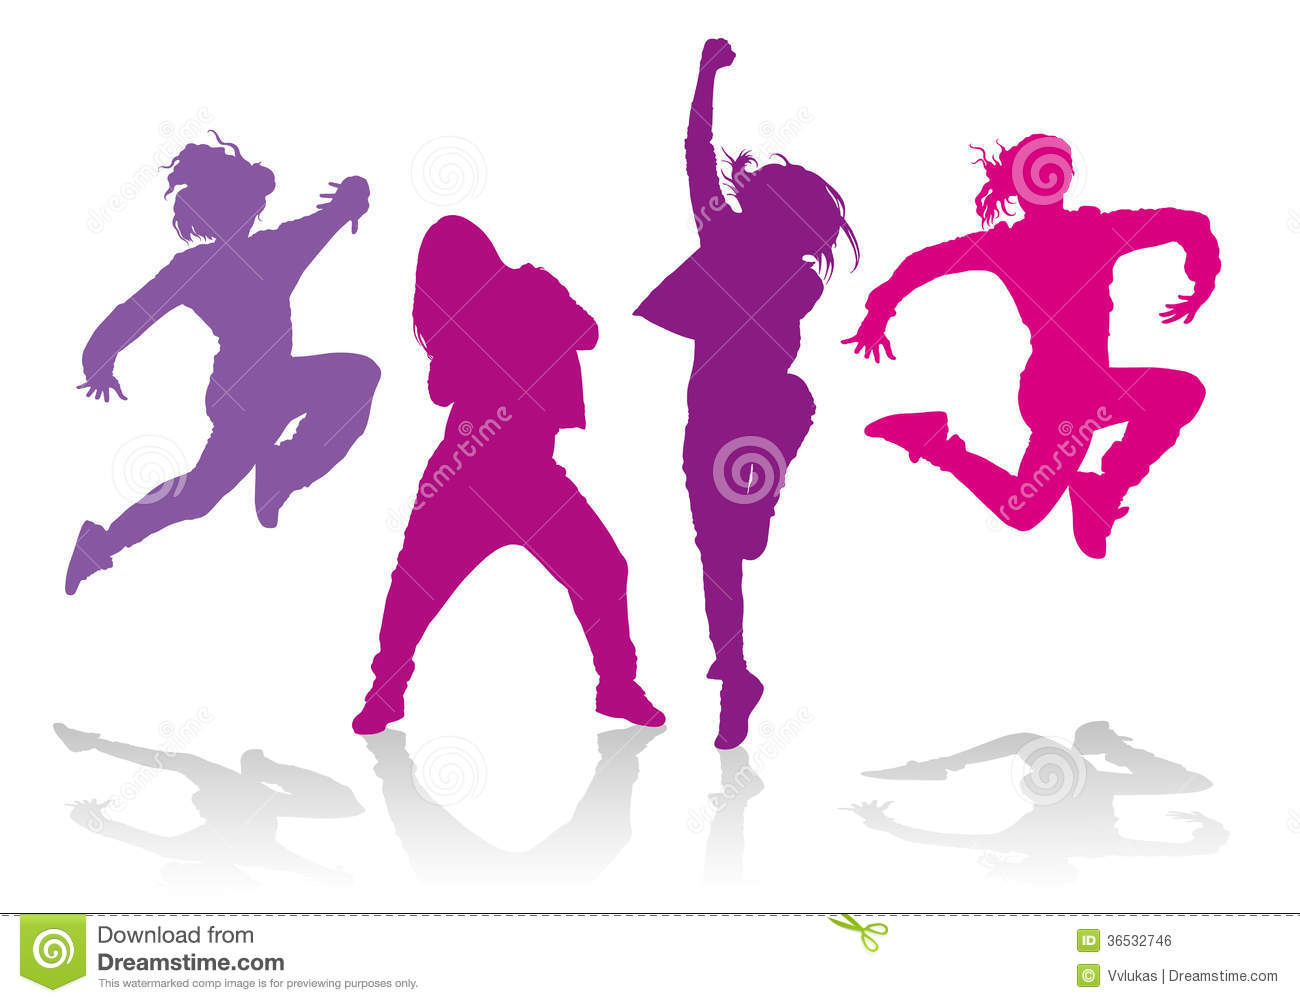 Royalty Free Stock Image  Silhouettes Of Girls Dancing Hip Hop Dance